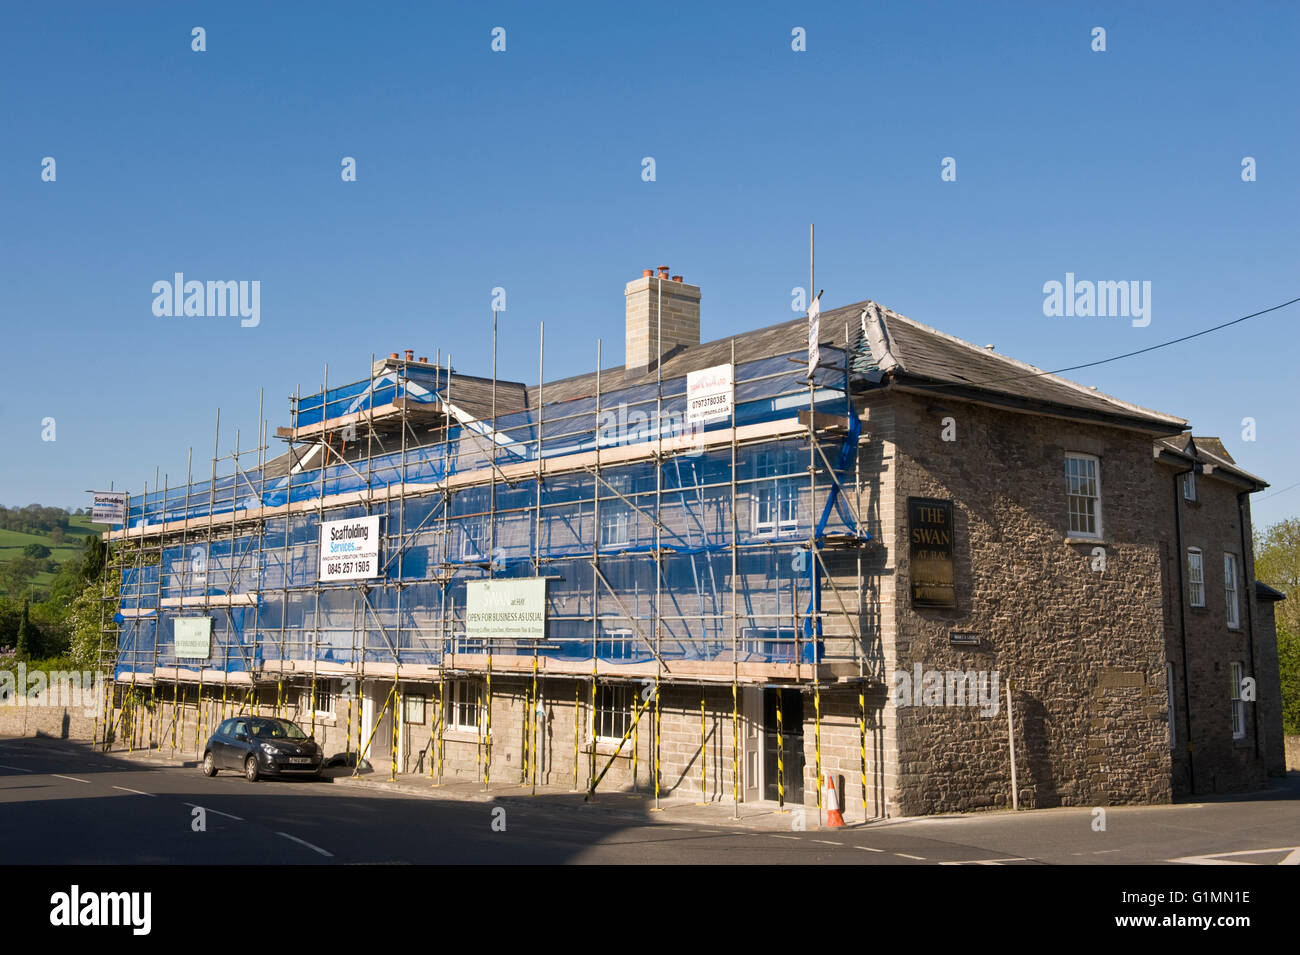 The Swan Hotel at Hay-on-Wye Powys Wales UK. A Georgian Grade II listed building covered in scaffolding while undergoing extensive refurbishment. Stock Photo